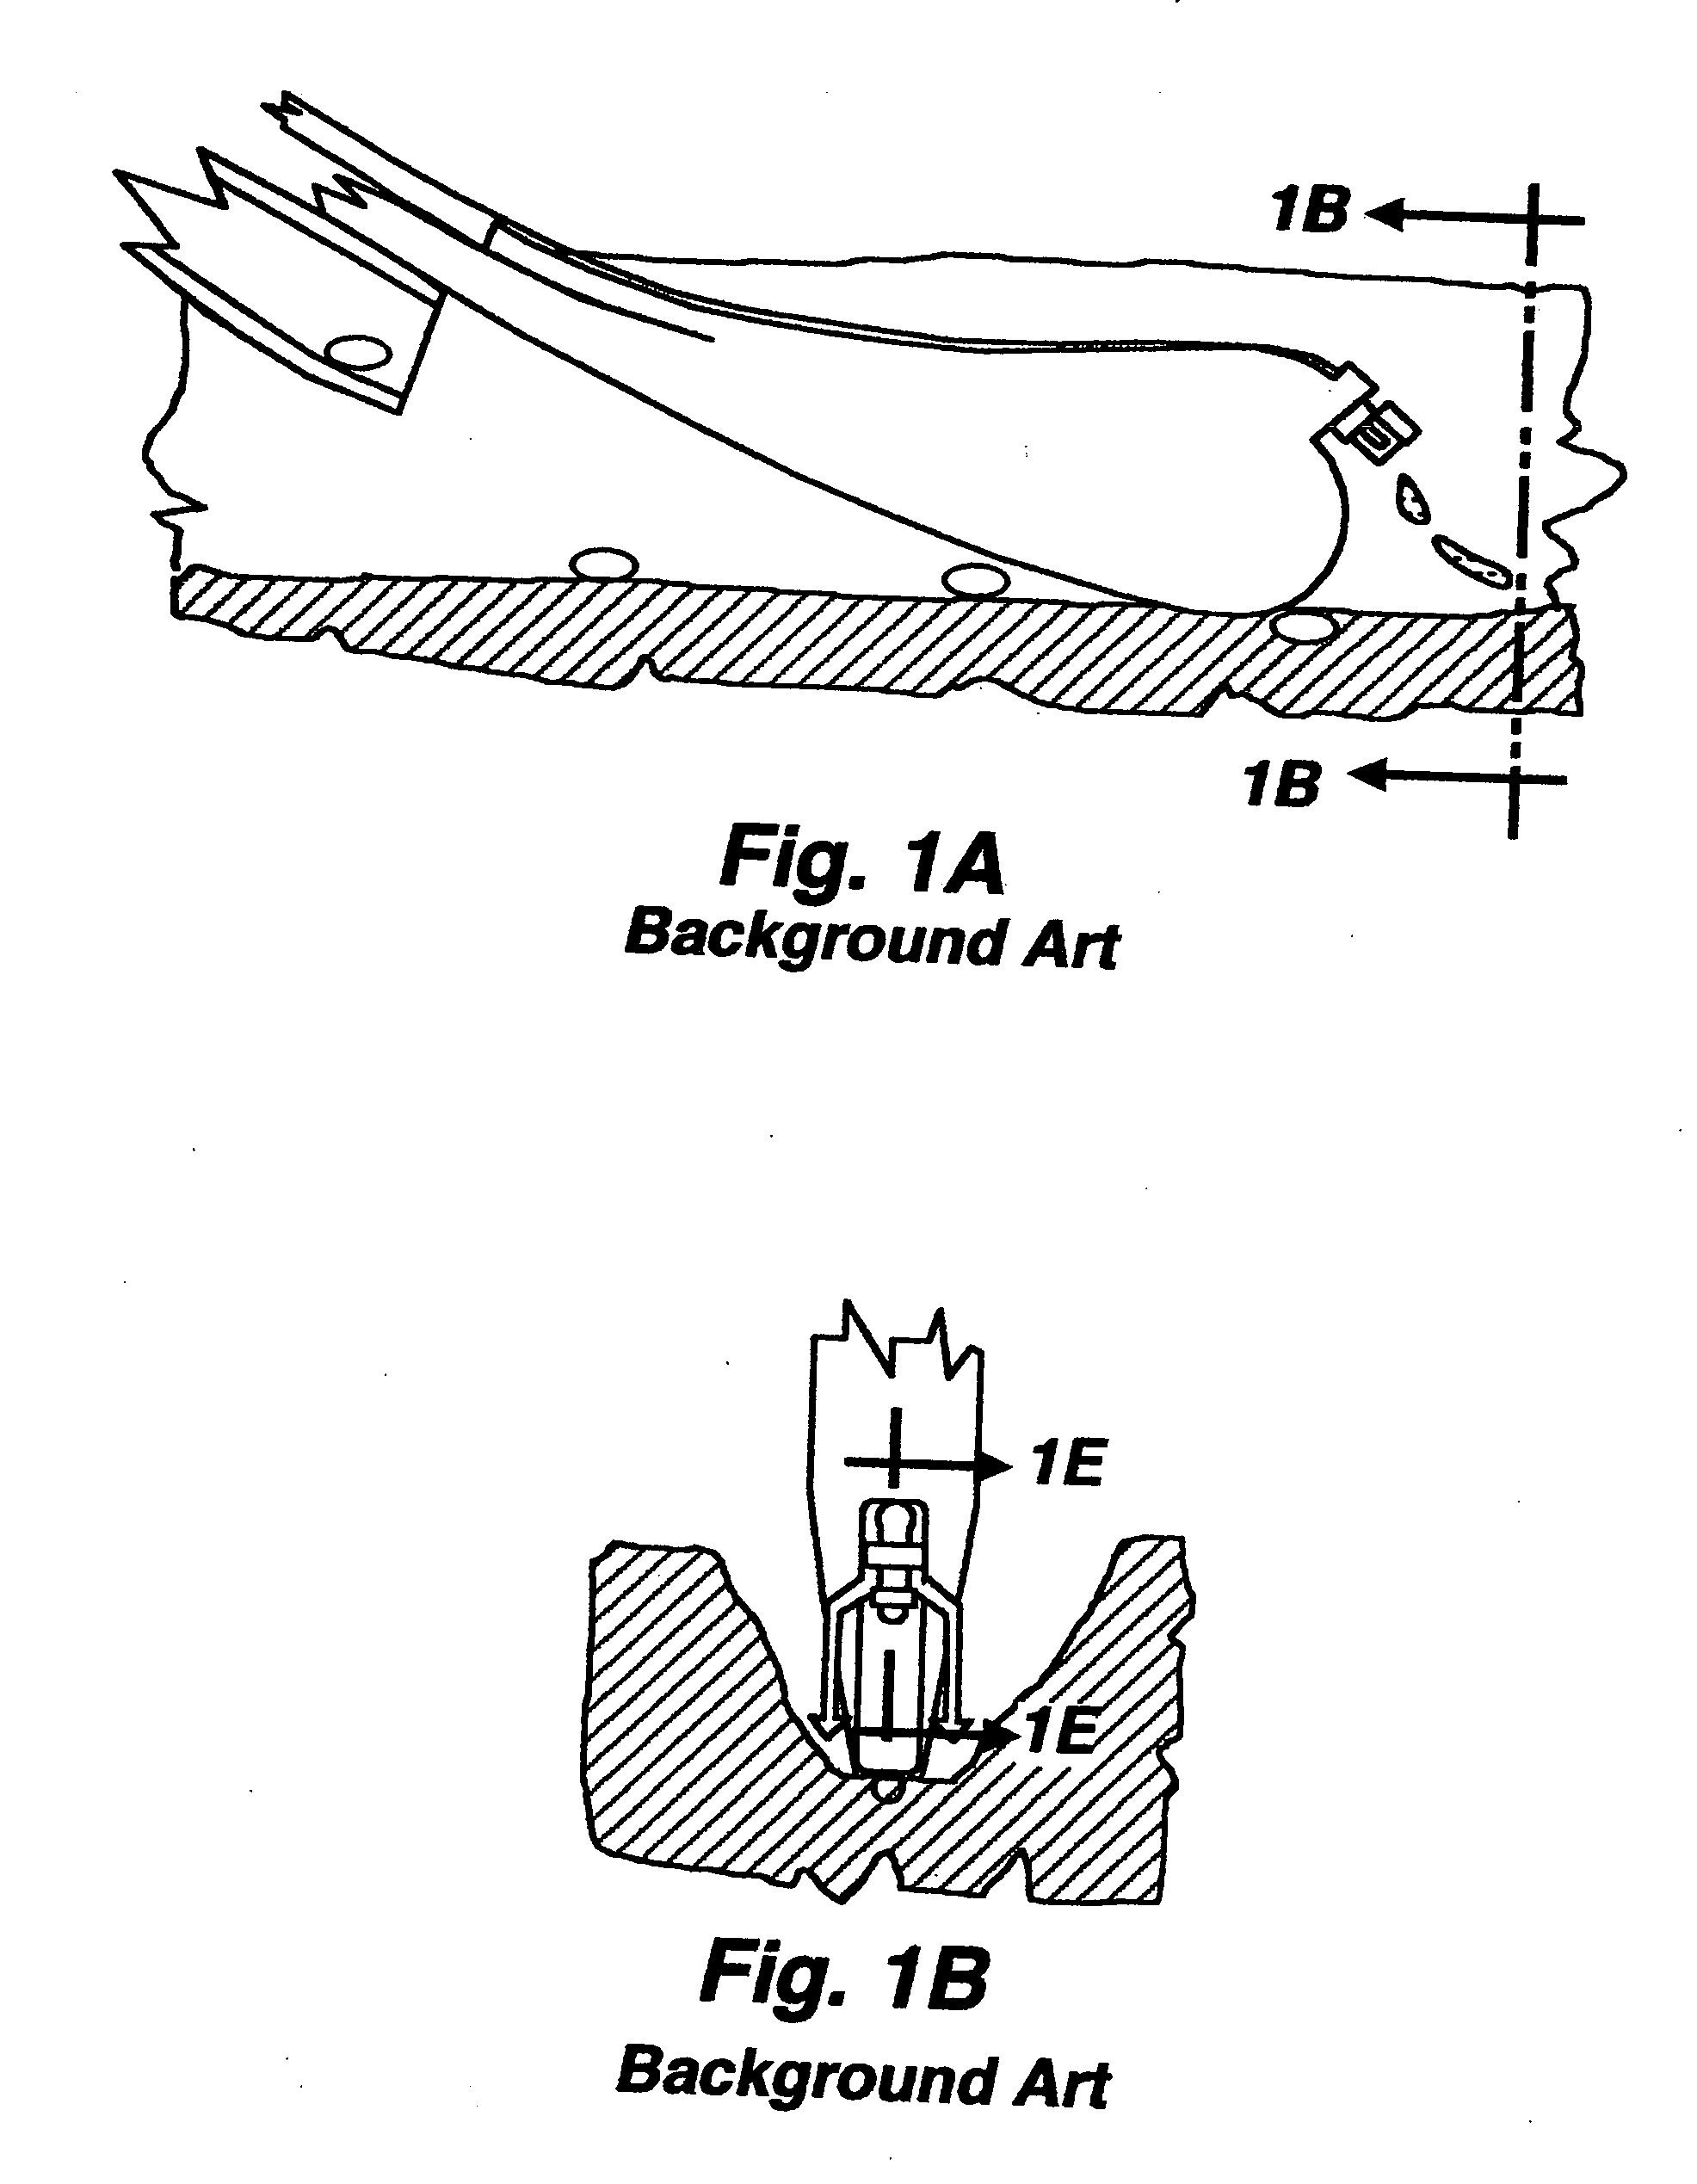 Liquid distribution apparatus employing a check valve for distributing liquid into a seed furrow